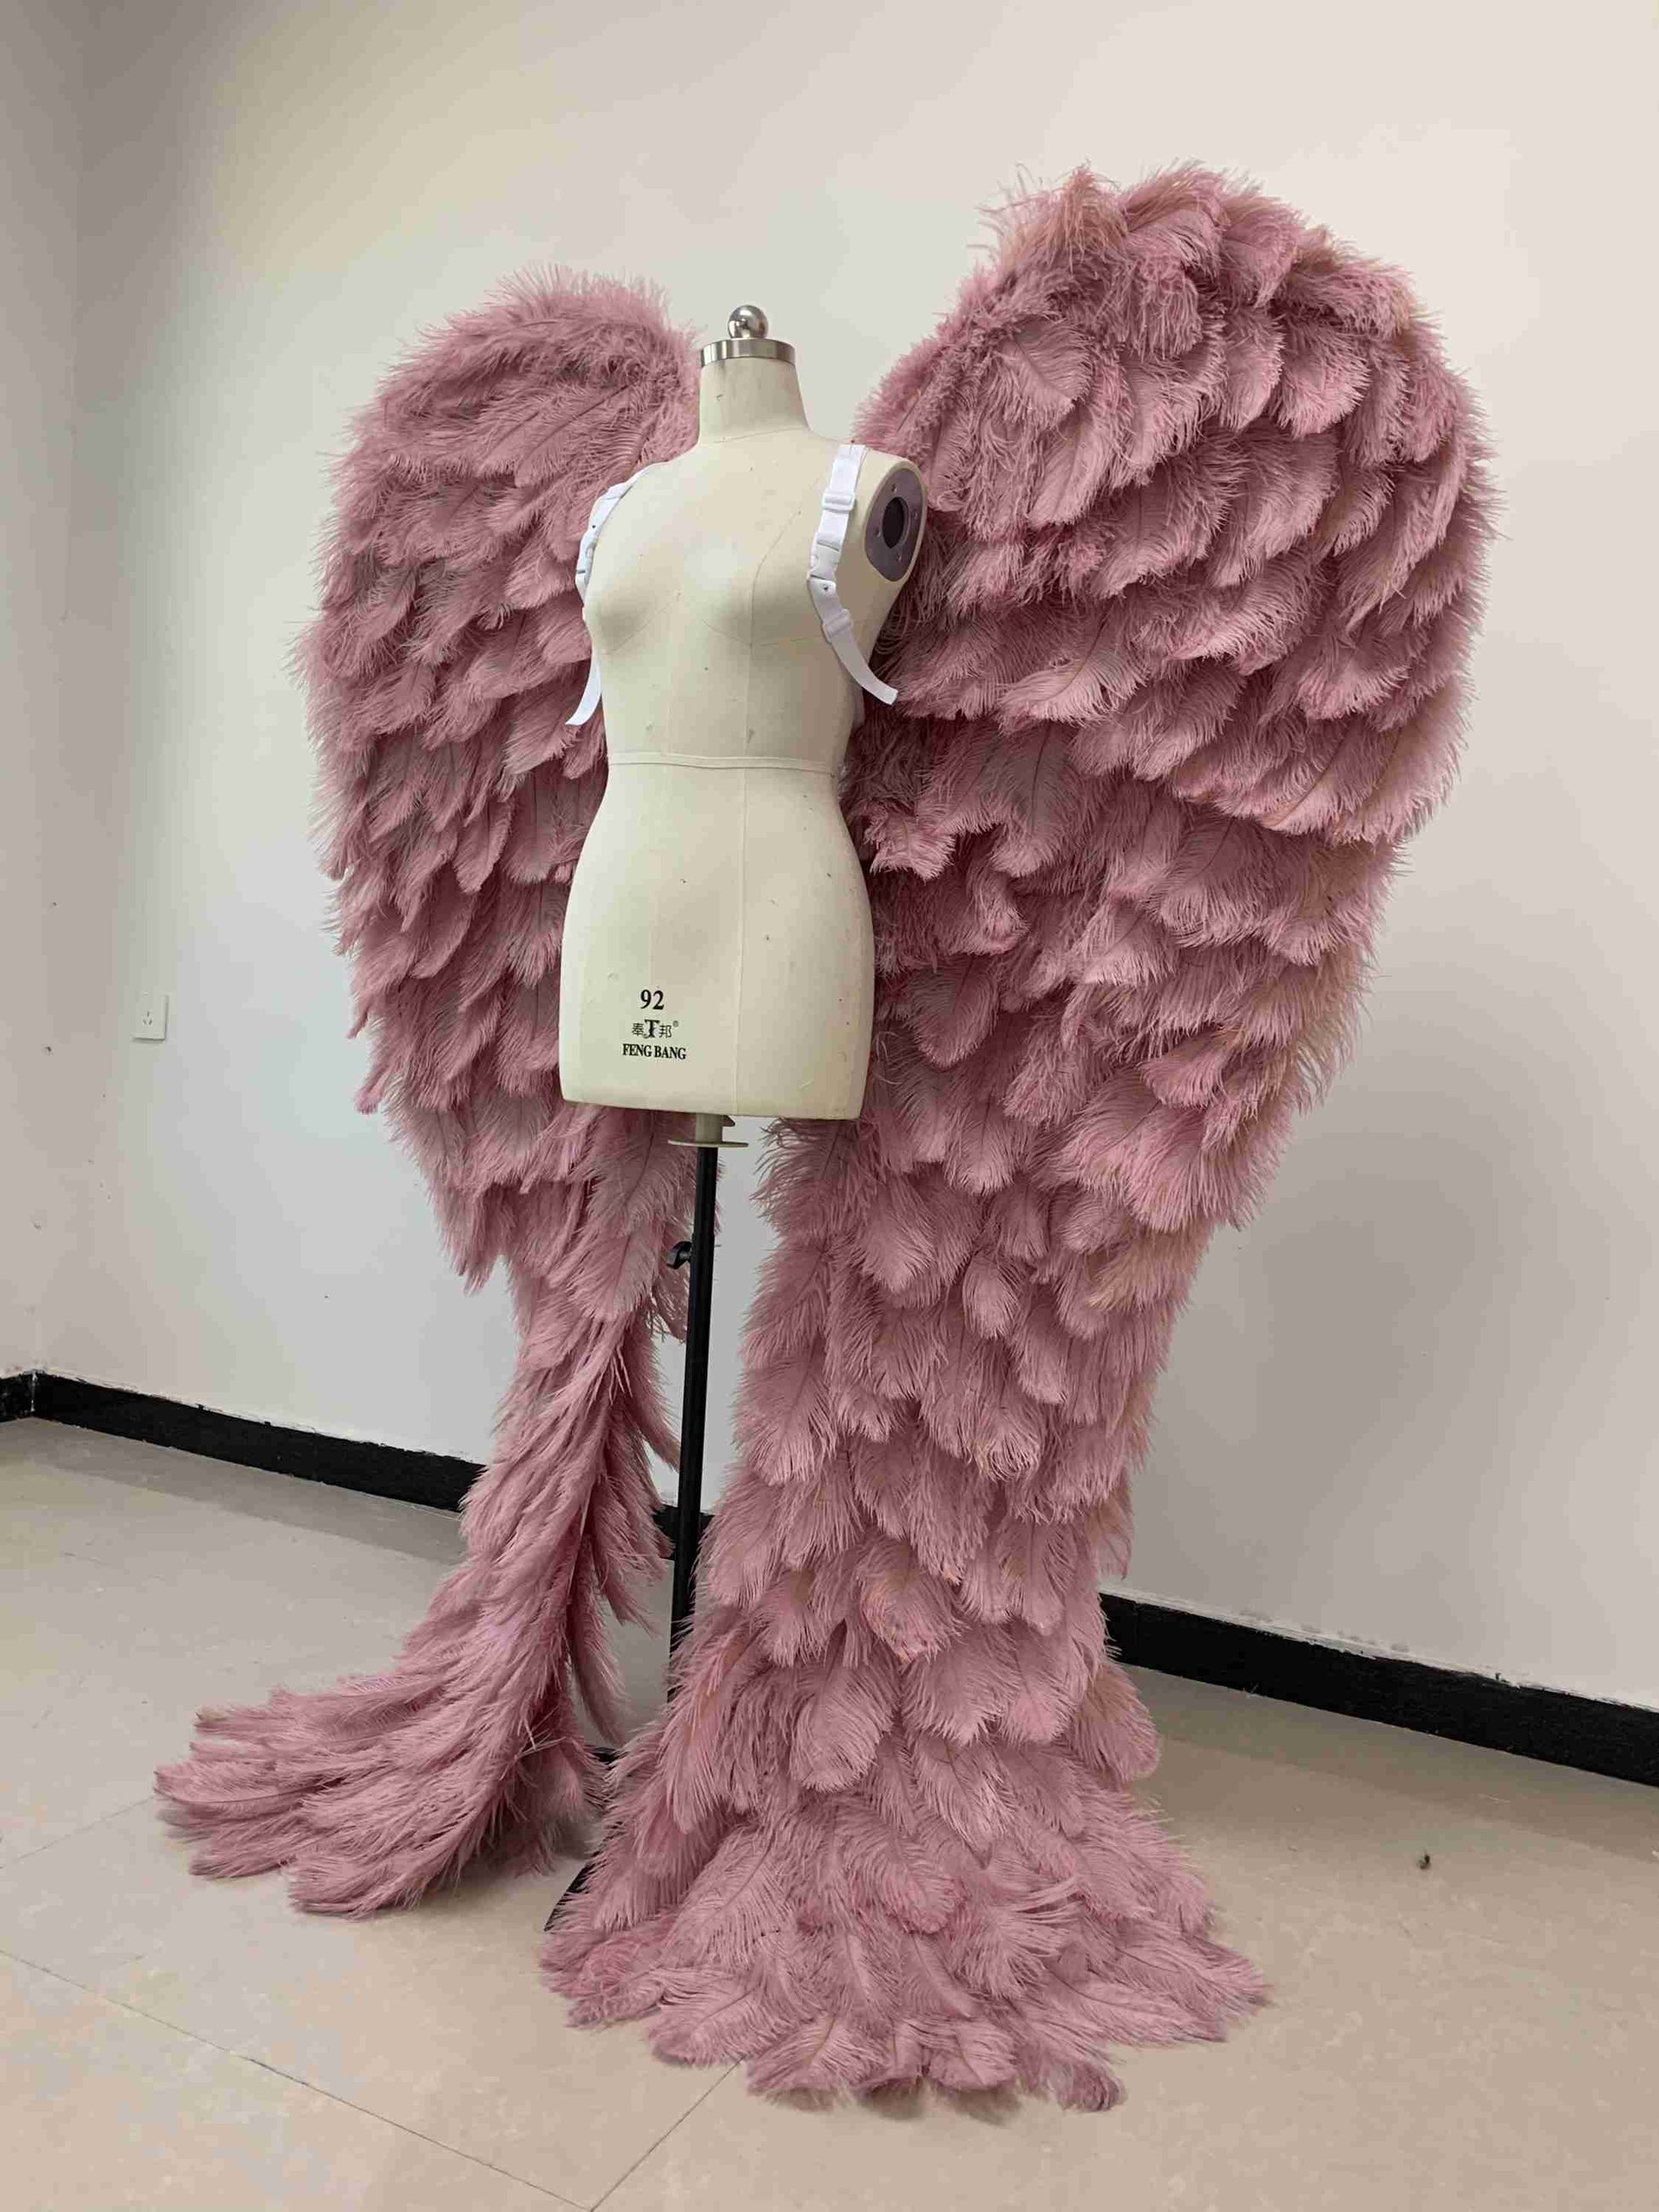 Our luxury purple angel wings from the left side. Made from ostrich feathers. Wings for angel costume. Suitable for photoshoots especially for boudoirs.